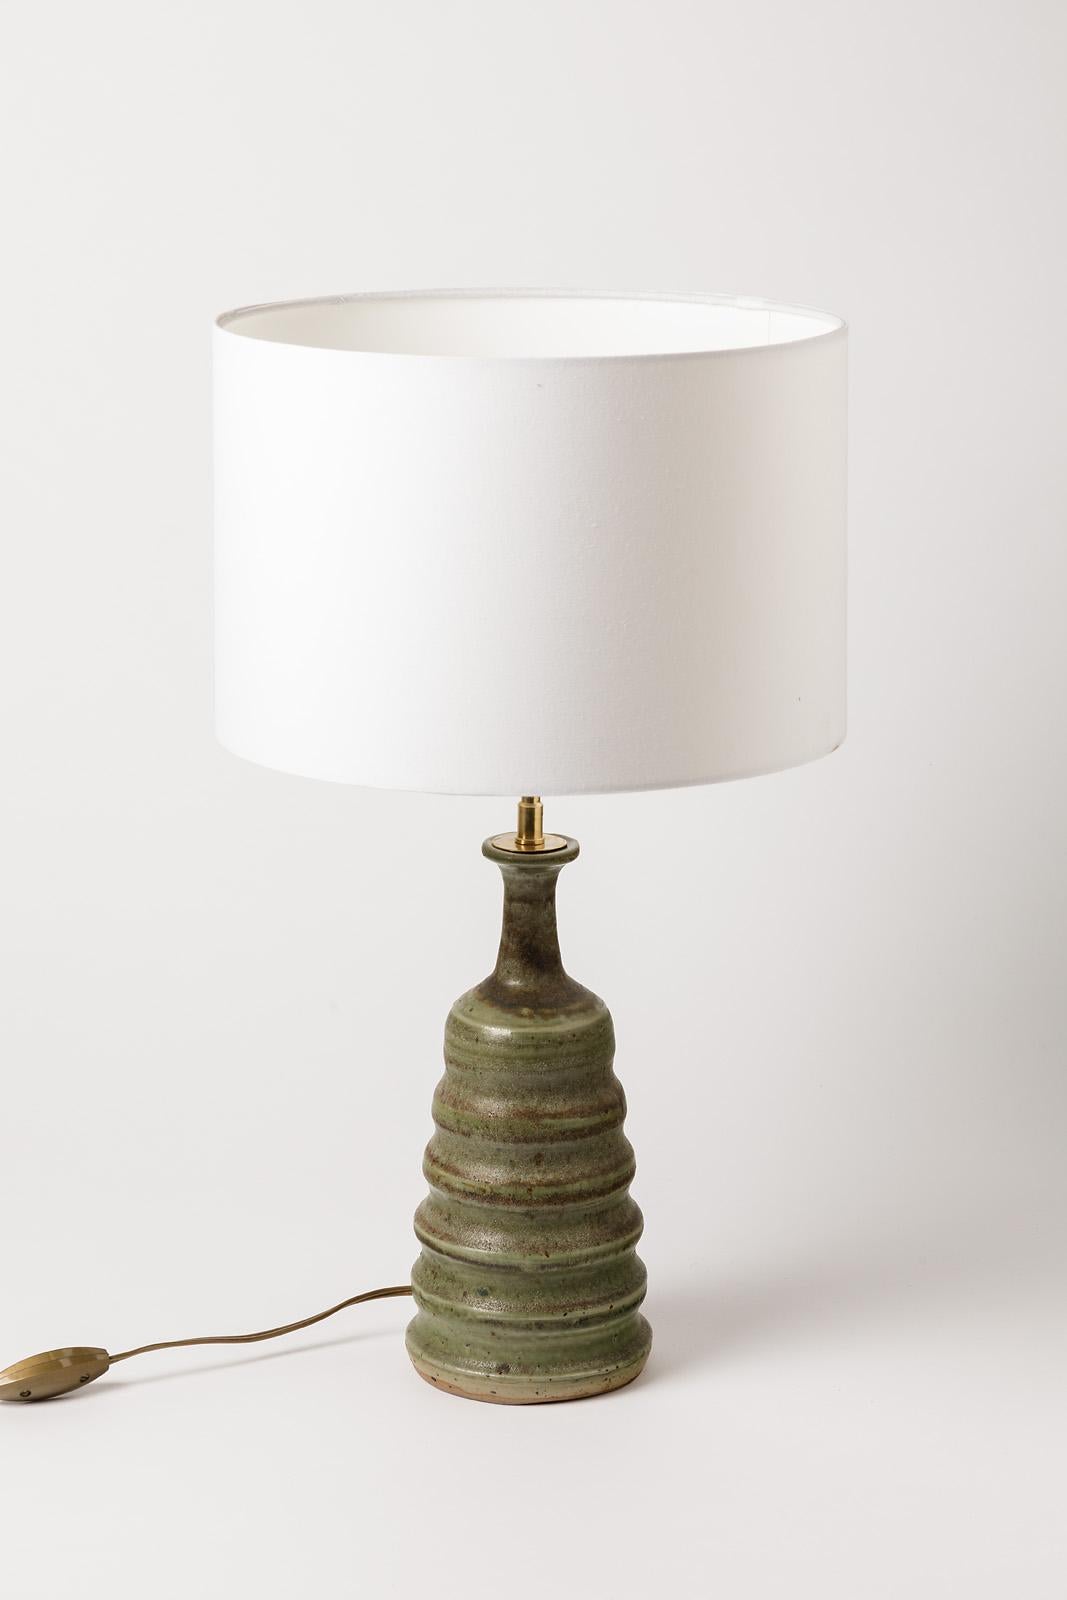 French Decorative Midcentury Green Ceramic Table Lamp circa 1970 by Fontcombault For Sale